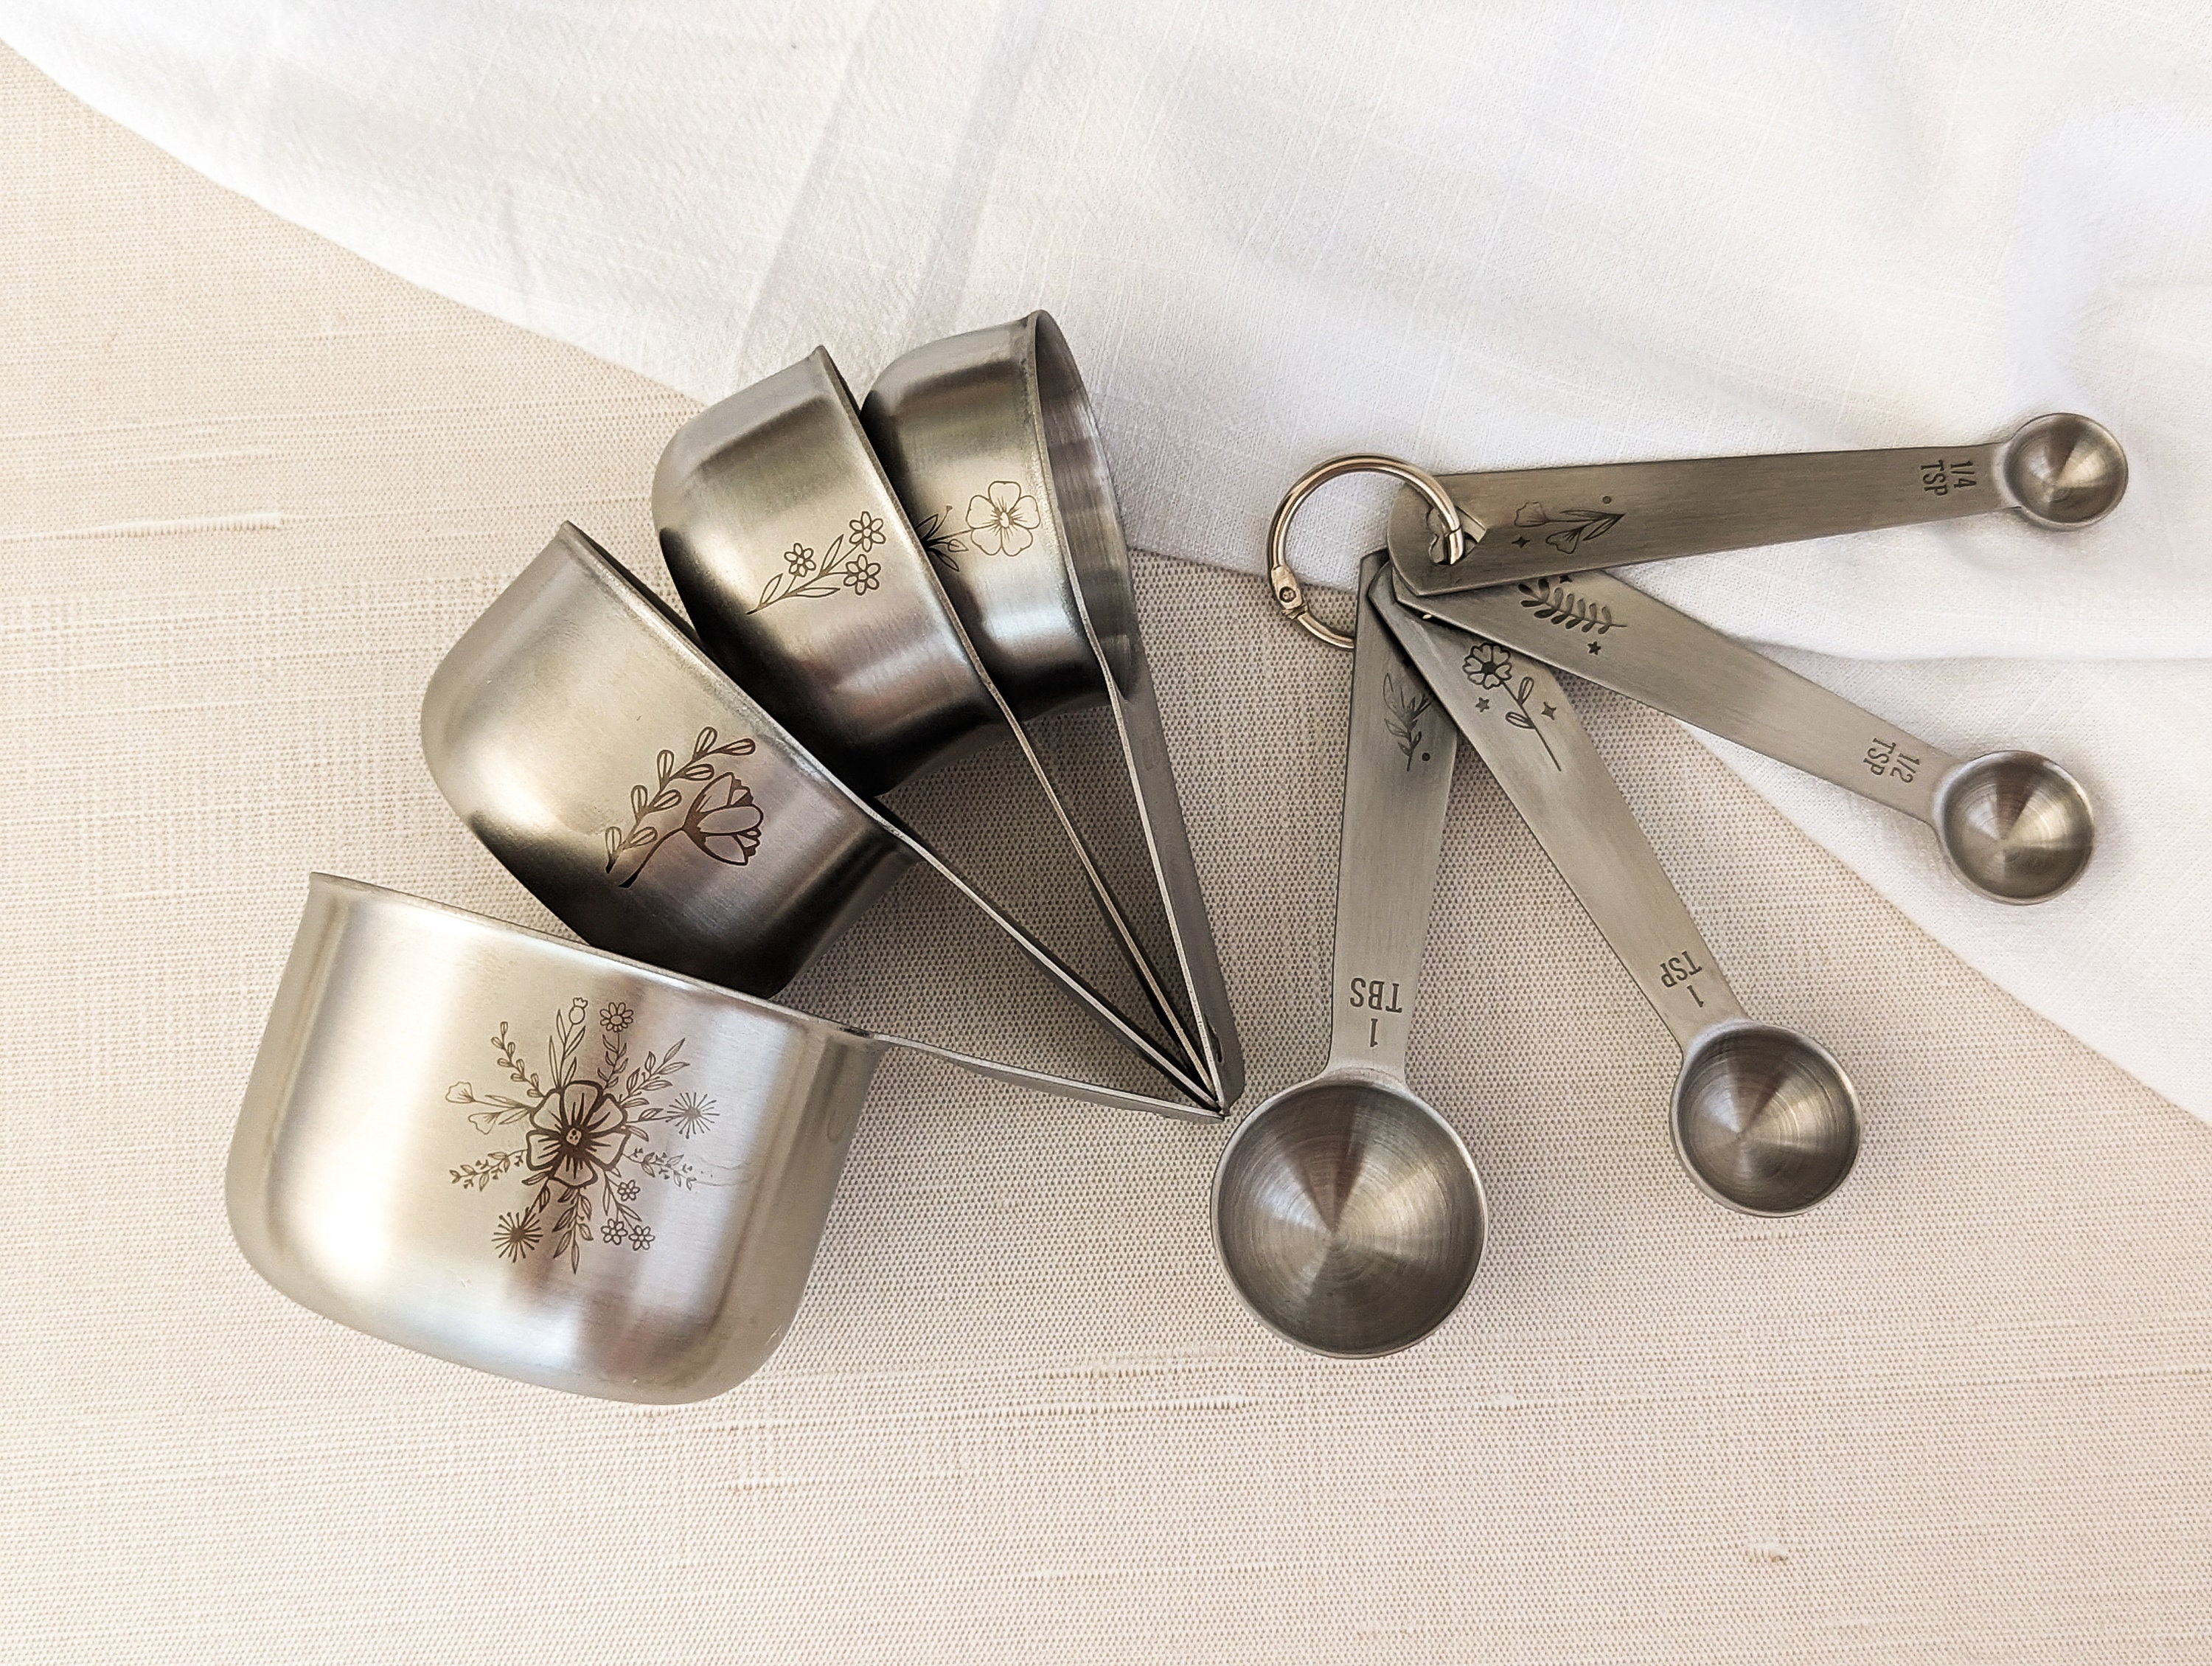 Measuring Cups, Stainless Steel Spoons, Baking Gifts, Wildflower